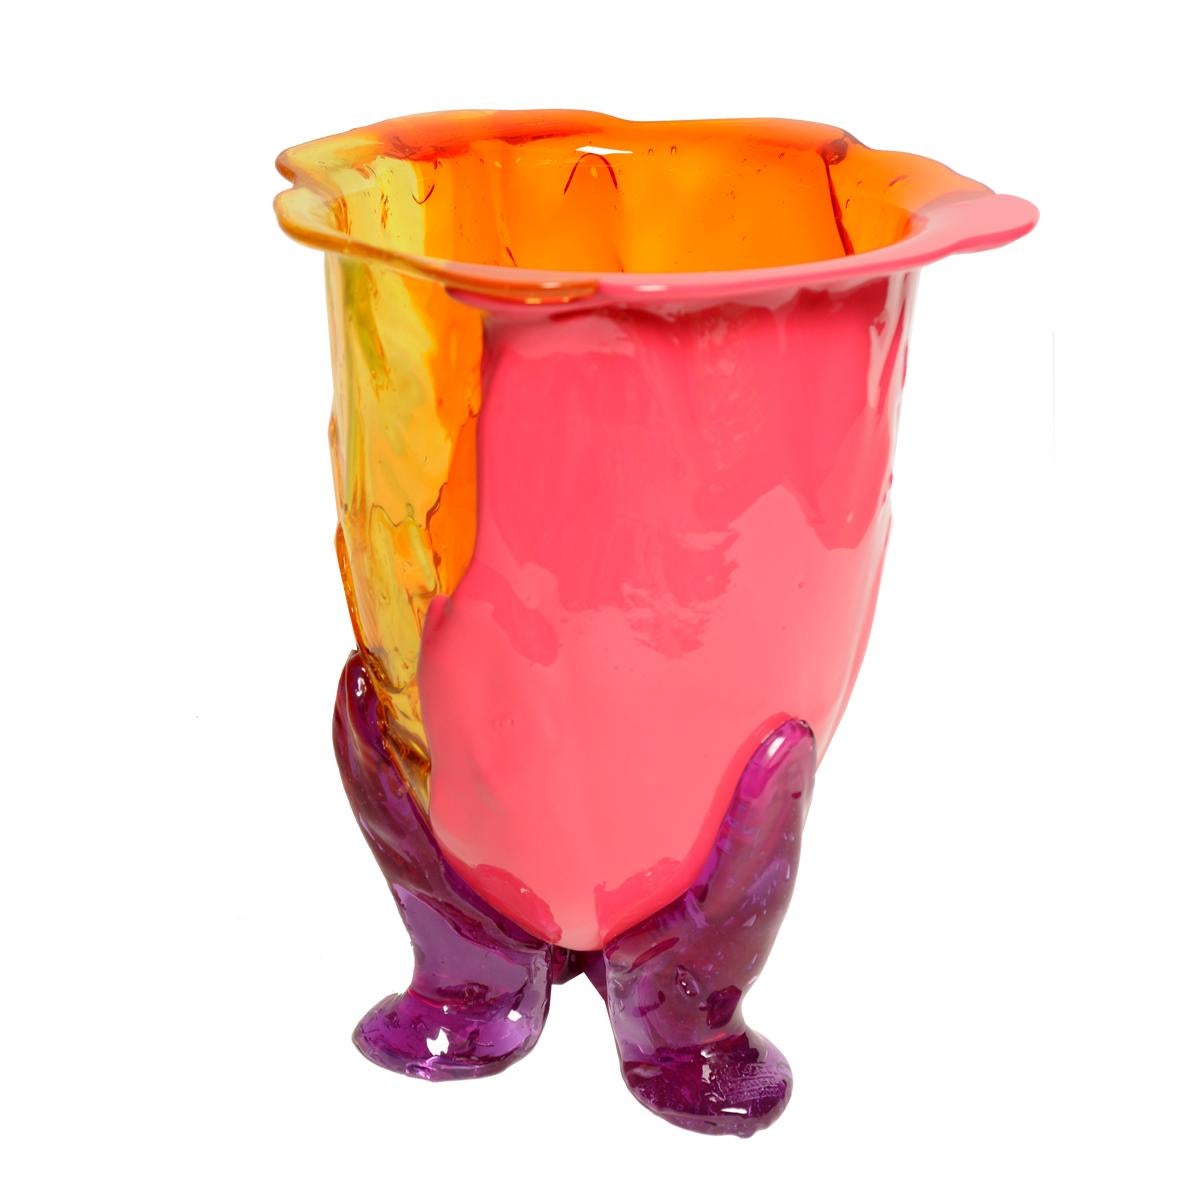 Amazonia vase - clear yellow, clear orange, matt fuchsia, clear lilac.

Vase in soft resin designed by Gaetano Pesce in 1995 for Fish Design collection.

Measures: M - ø 16cm x H 26cm
Other sizes available.
Colours: clear yellow, clear orange,